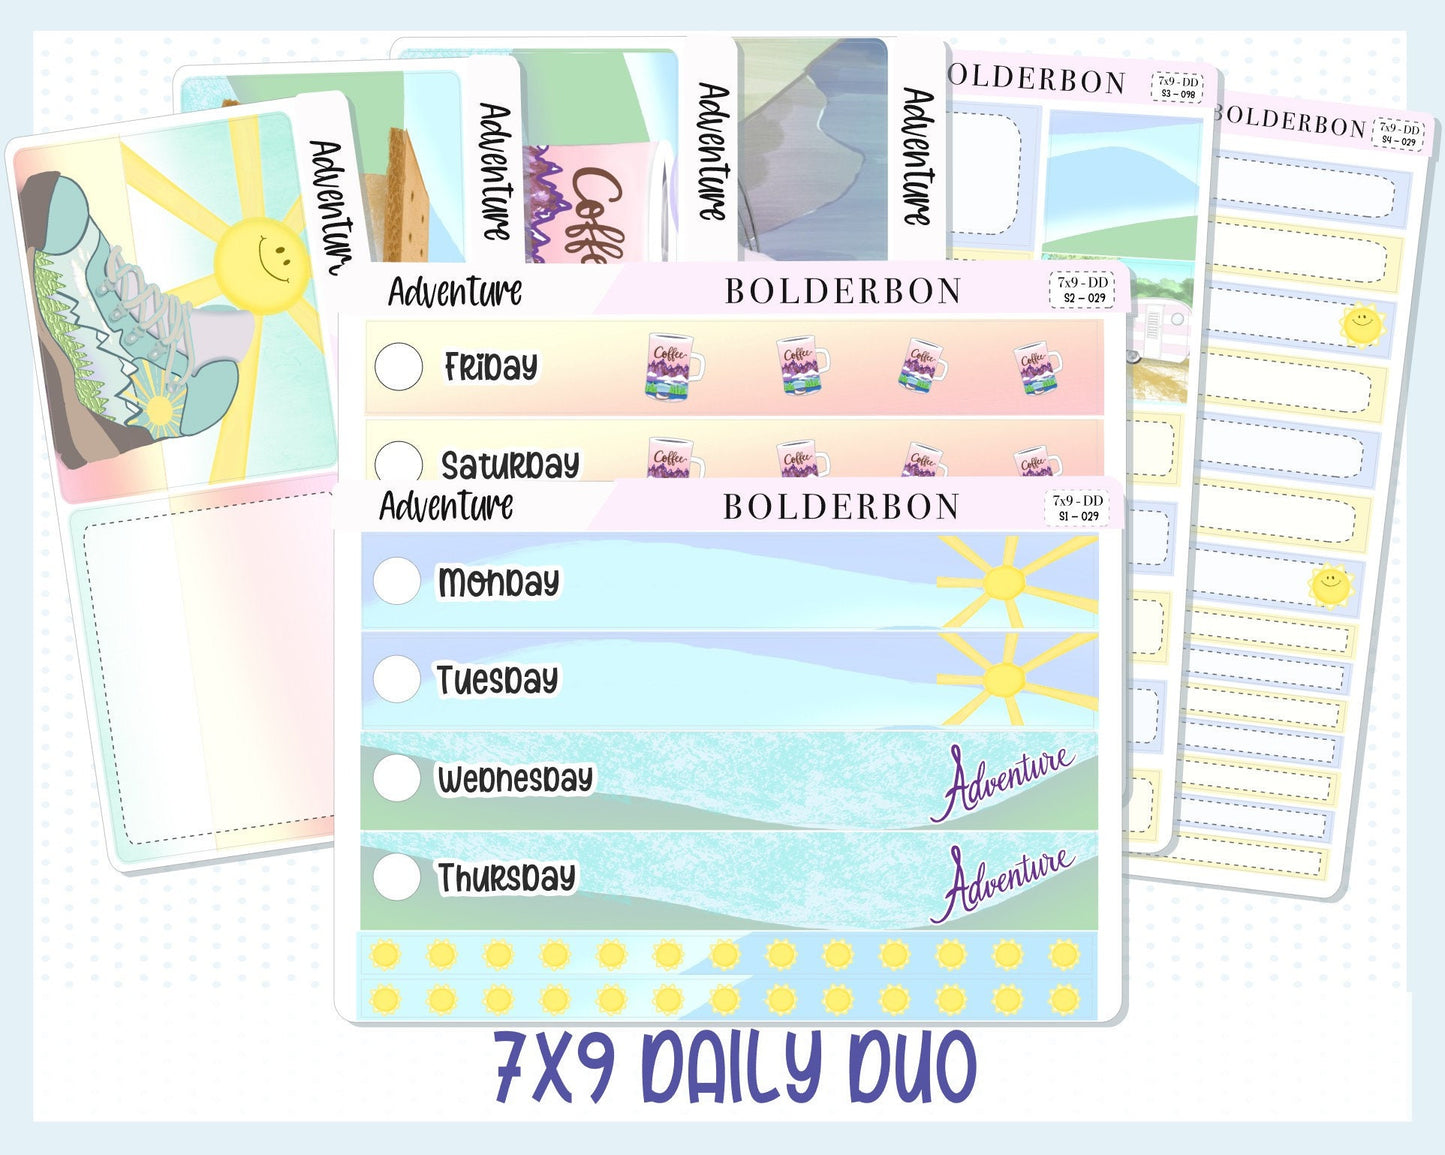 ADVENTURE "7x9 Daily Duo" || Weekly Planner Sticker Kit for Erin Condren, Hiking, Camping, Summer, Coffee